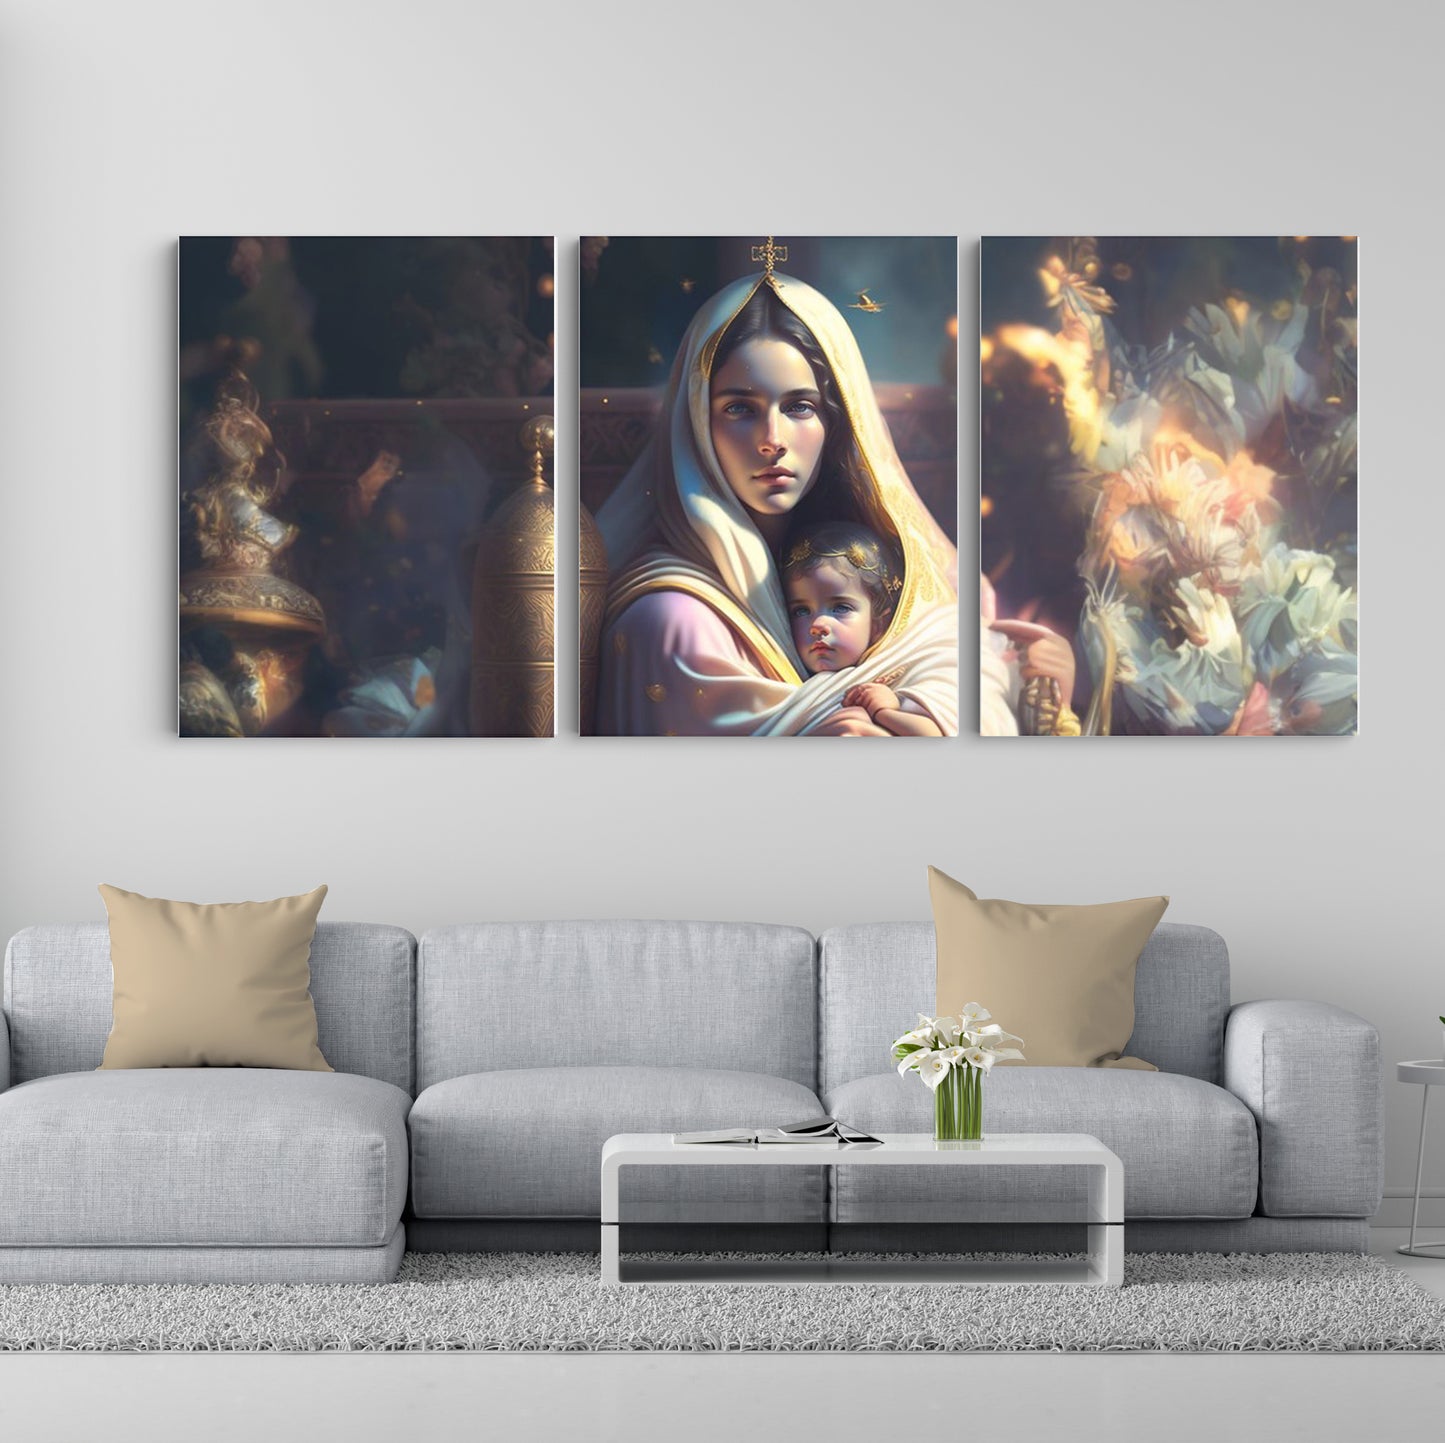 Sacred Serenity: Saint Mary Concept Art - Inspiring Wall Art Celebrating the Grace and Devotion of Saint Mary in a Conceptual Representation - S06E01